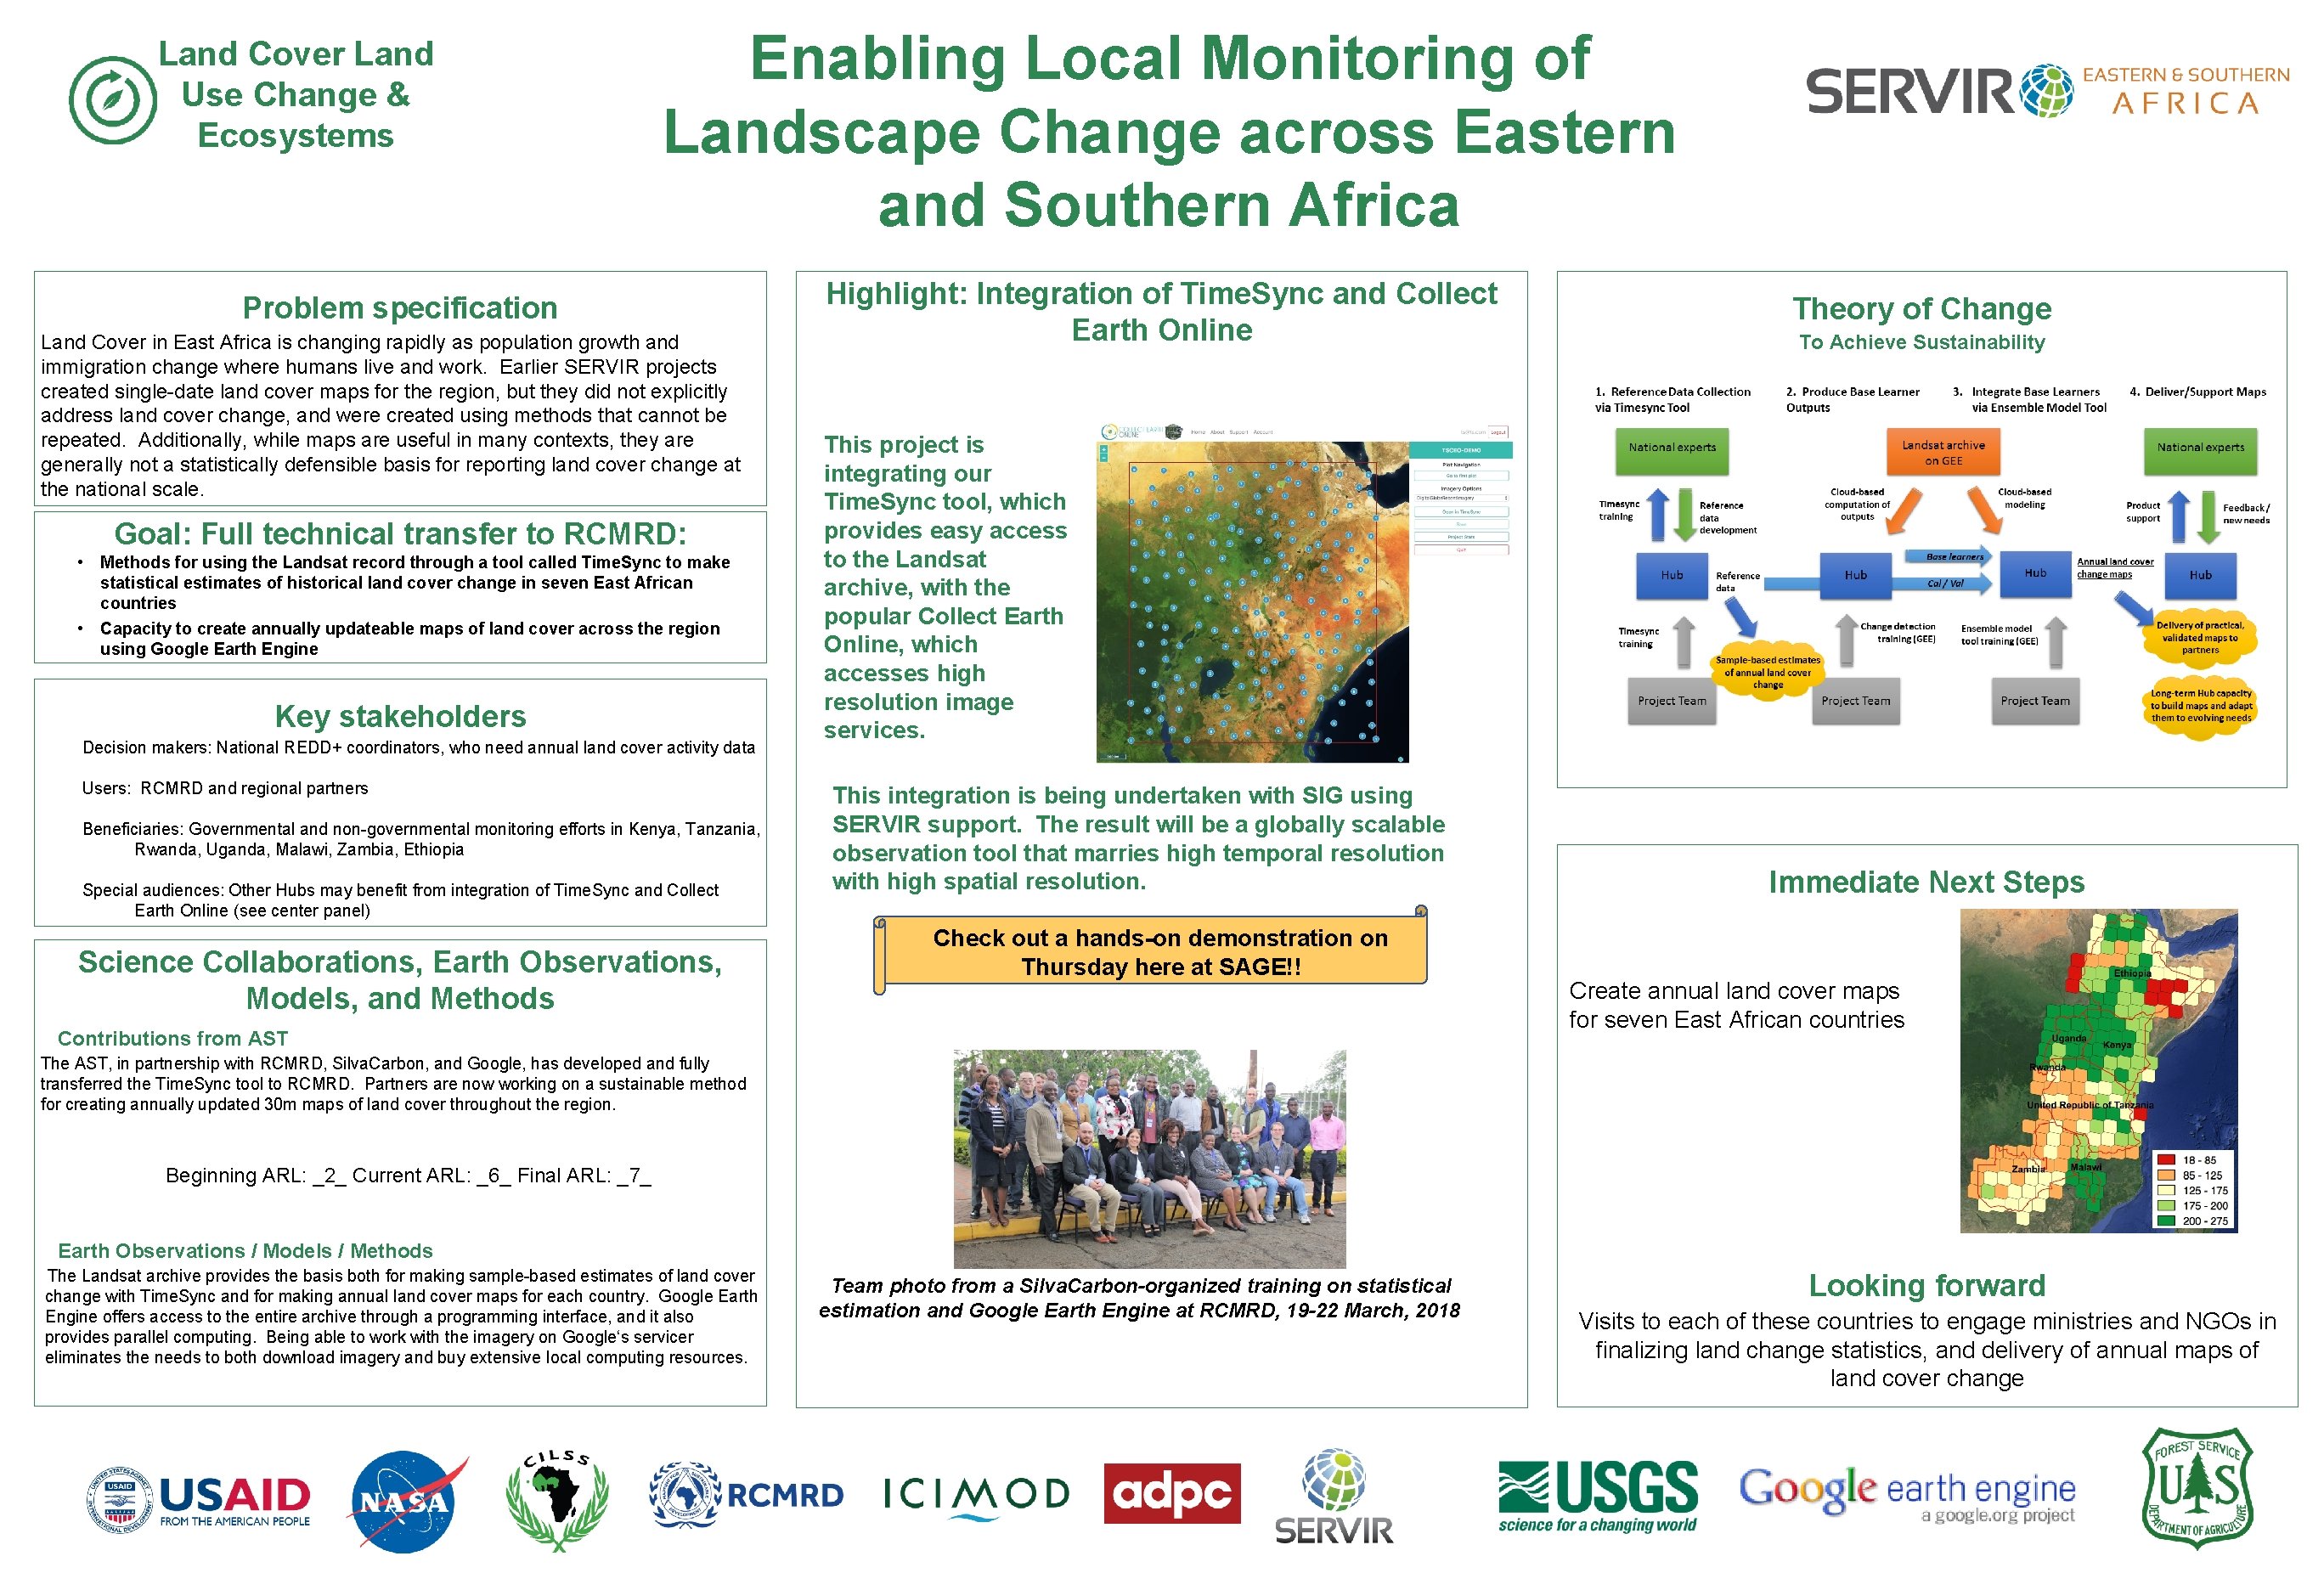 Land Cover Land Use Change & Ecosystems Enabling Local Monitoring of Landscape Change across